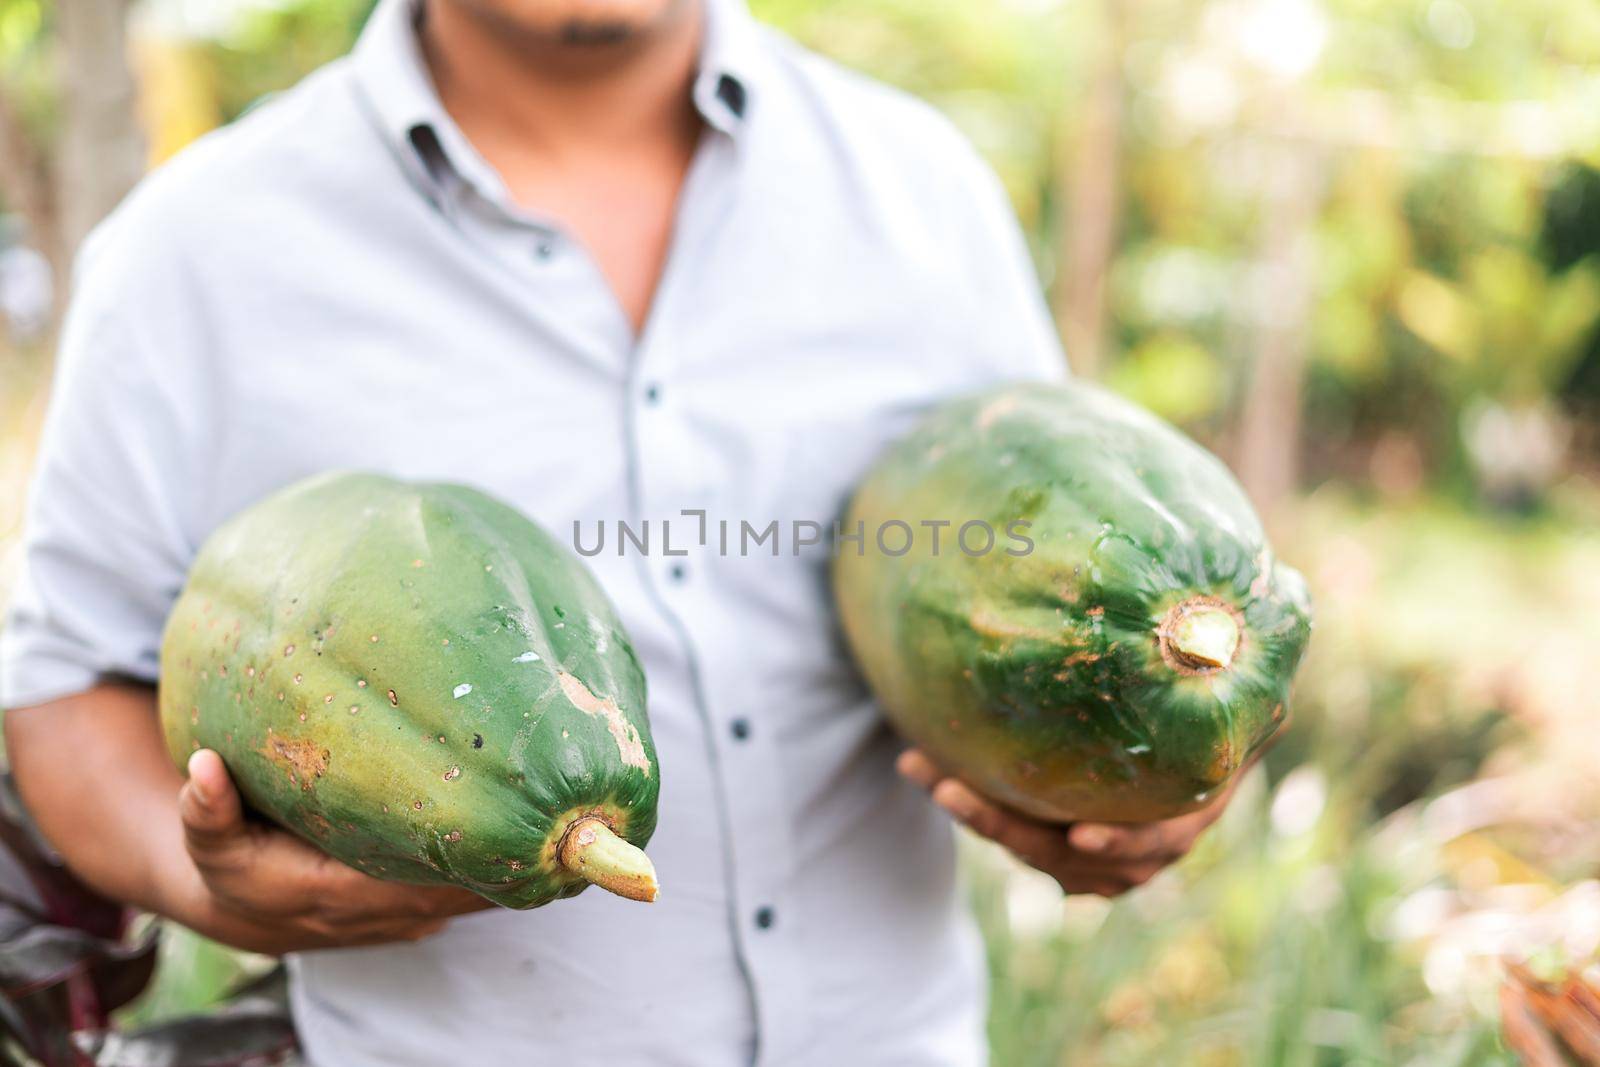 Unrecognizable man from Nicaragua on a farm holding papayas in his hands. Fruit production startup by cfalvarez